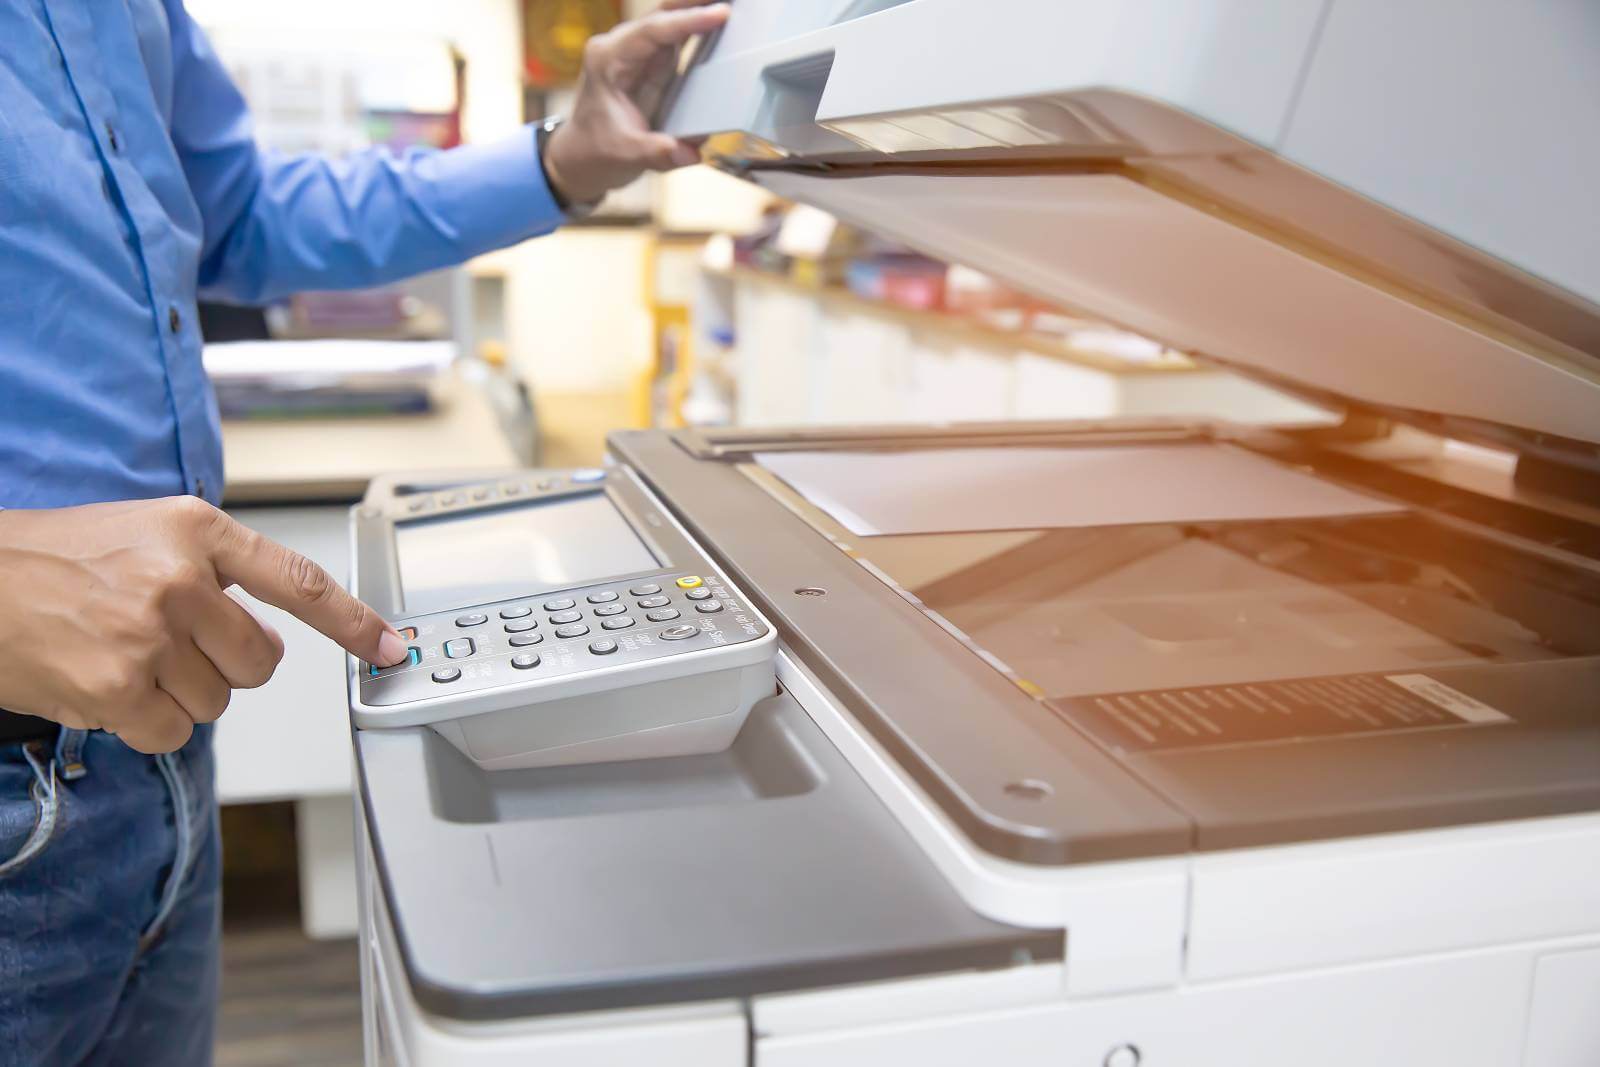 You are currently viewing Multifunction Printers: Big Benefits for Small Businesses